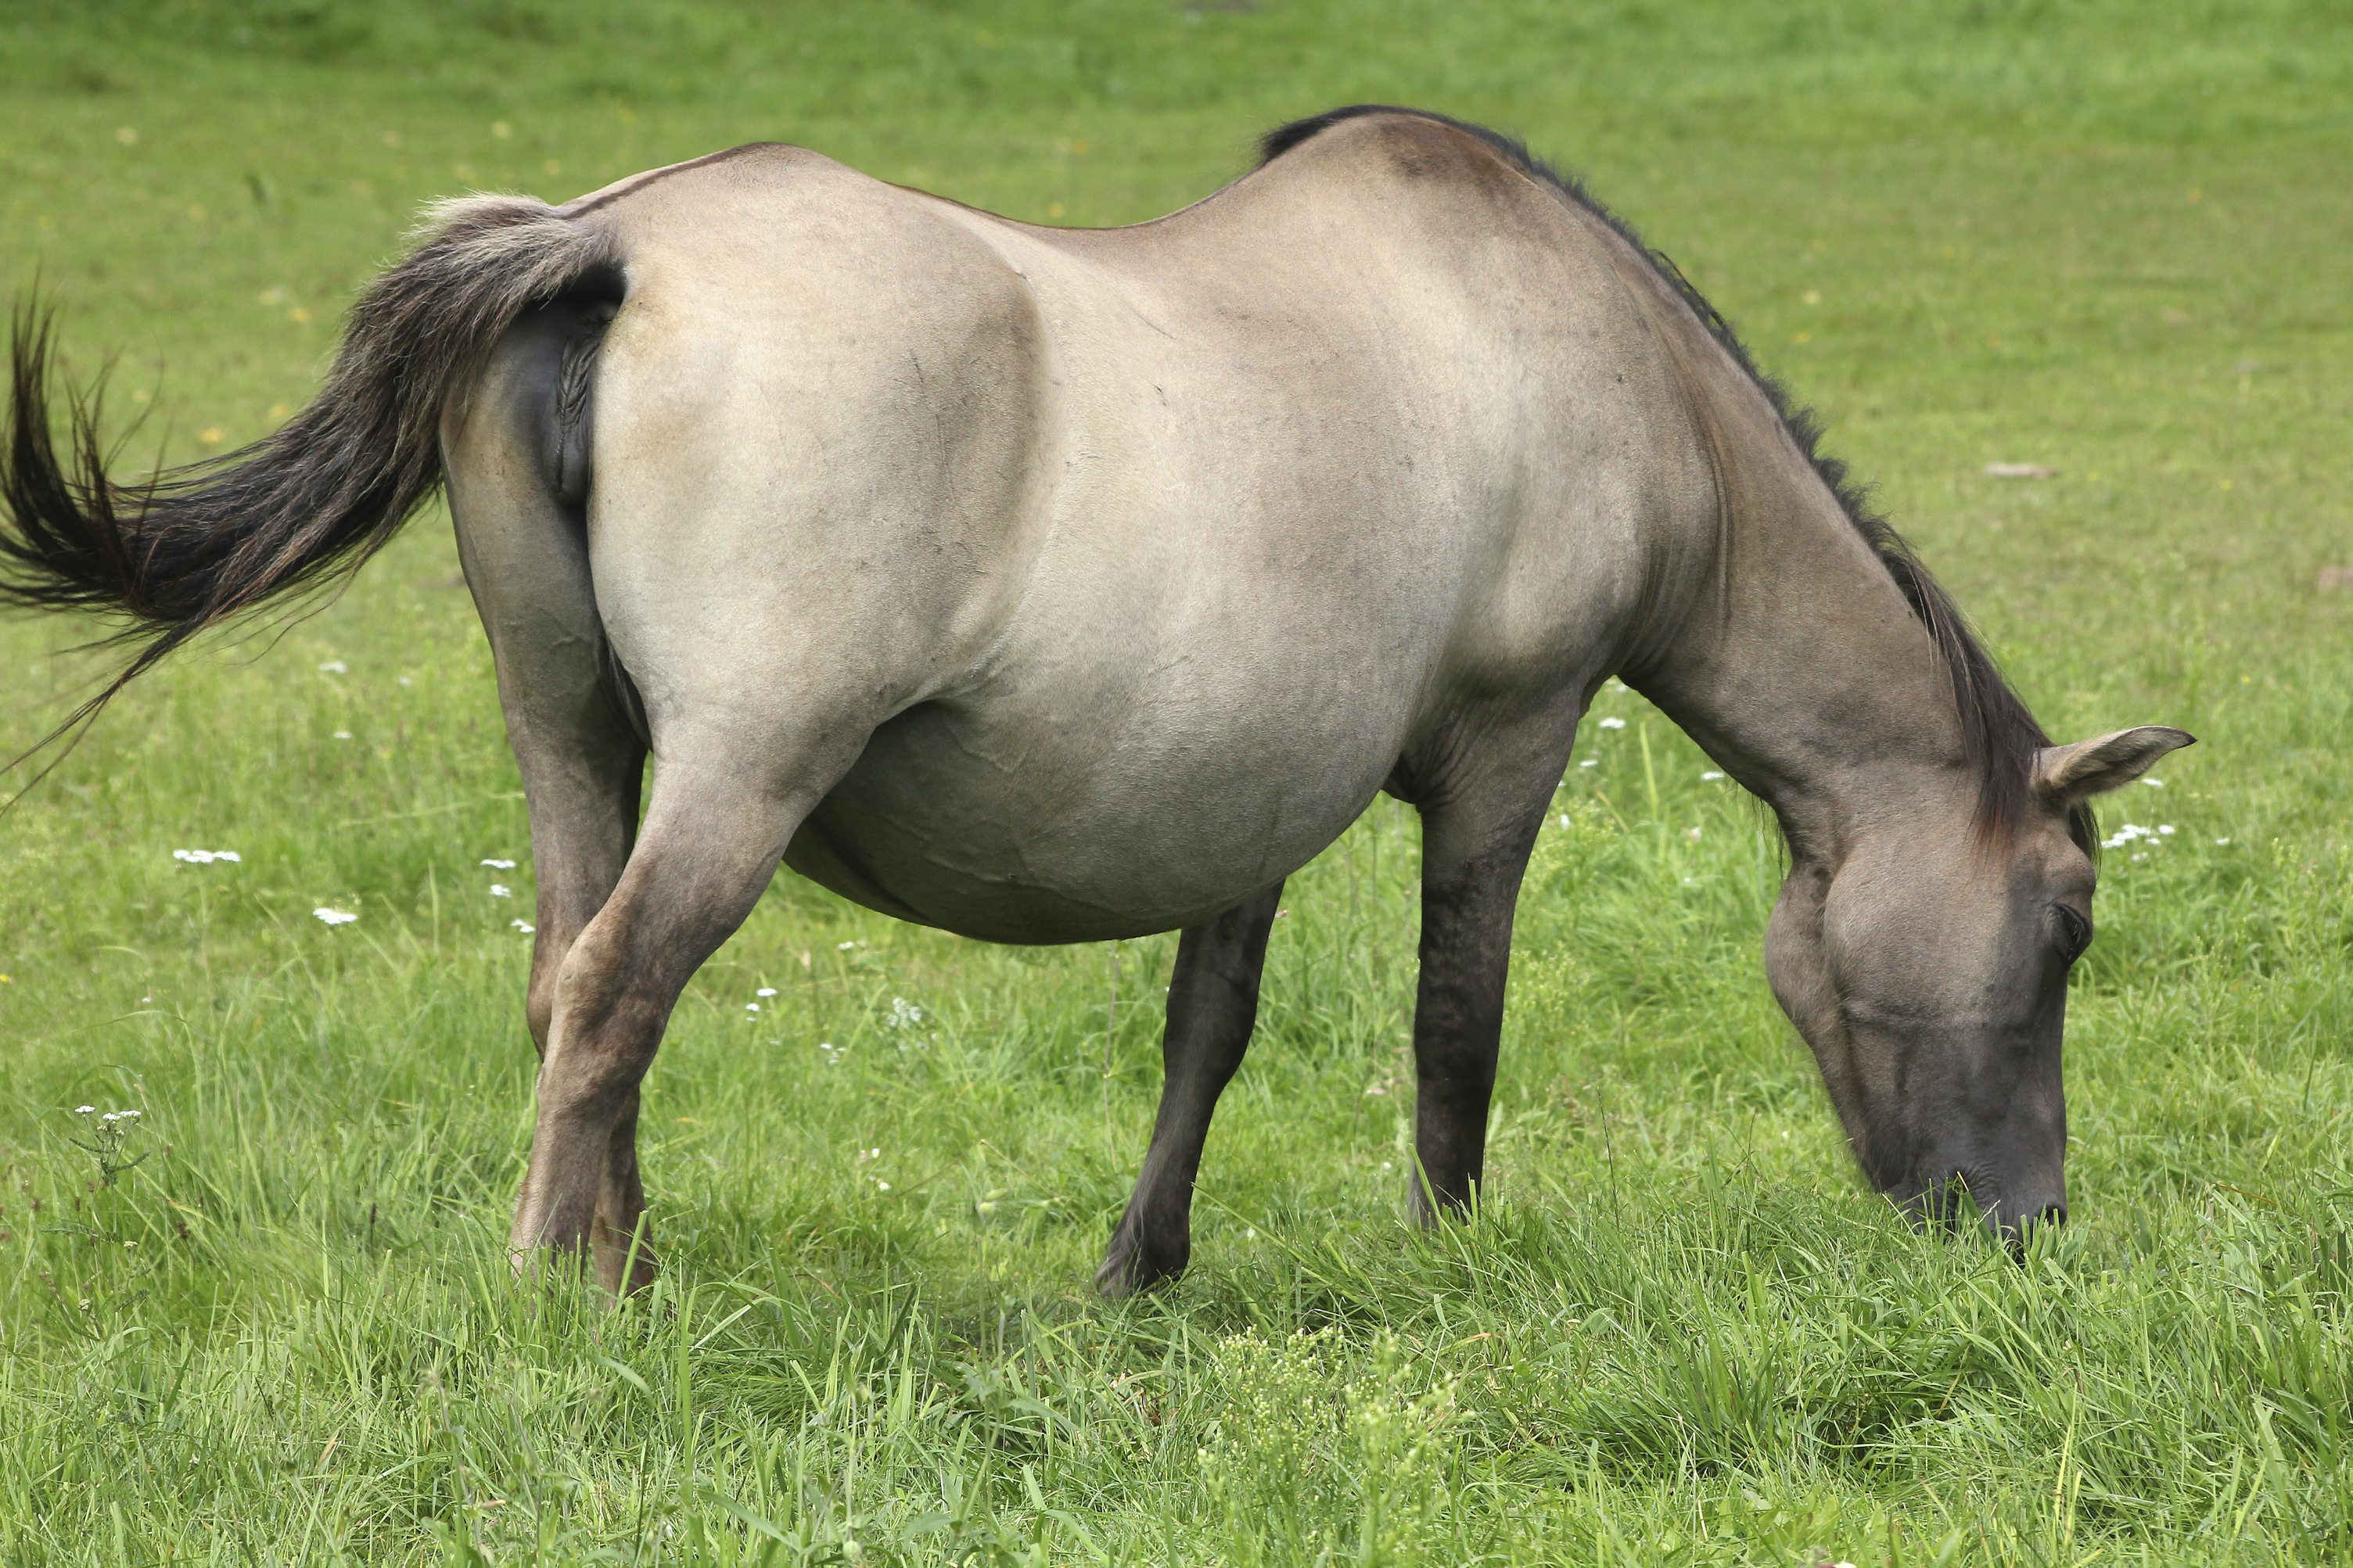 Pregnancy Stages in Horses | Animals - mom.me